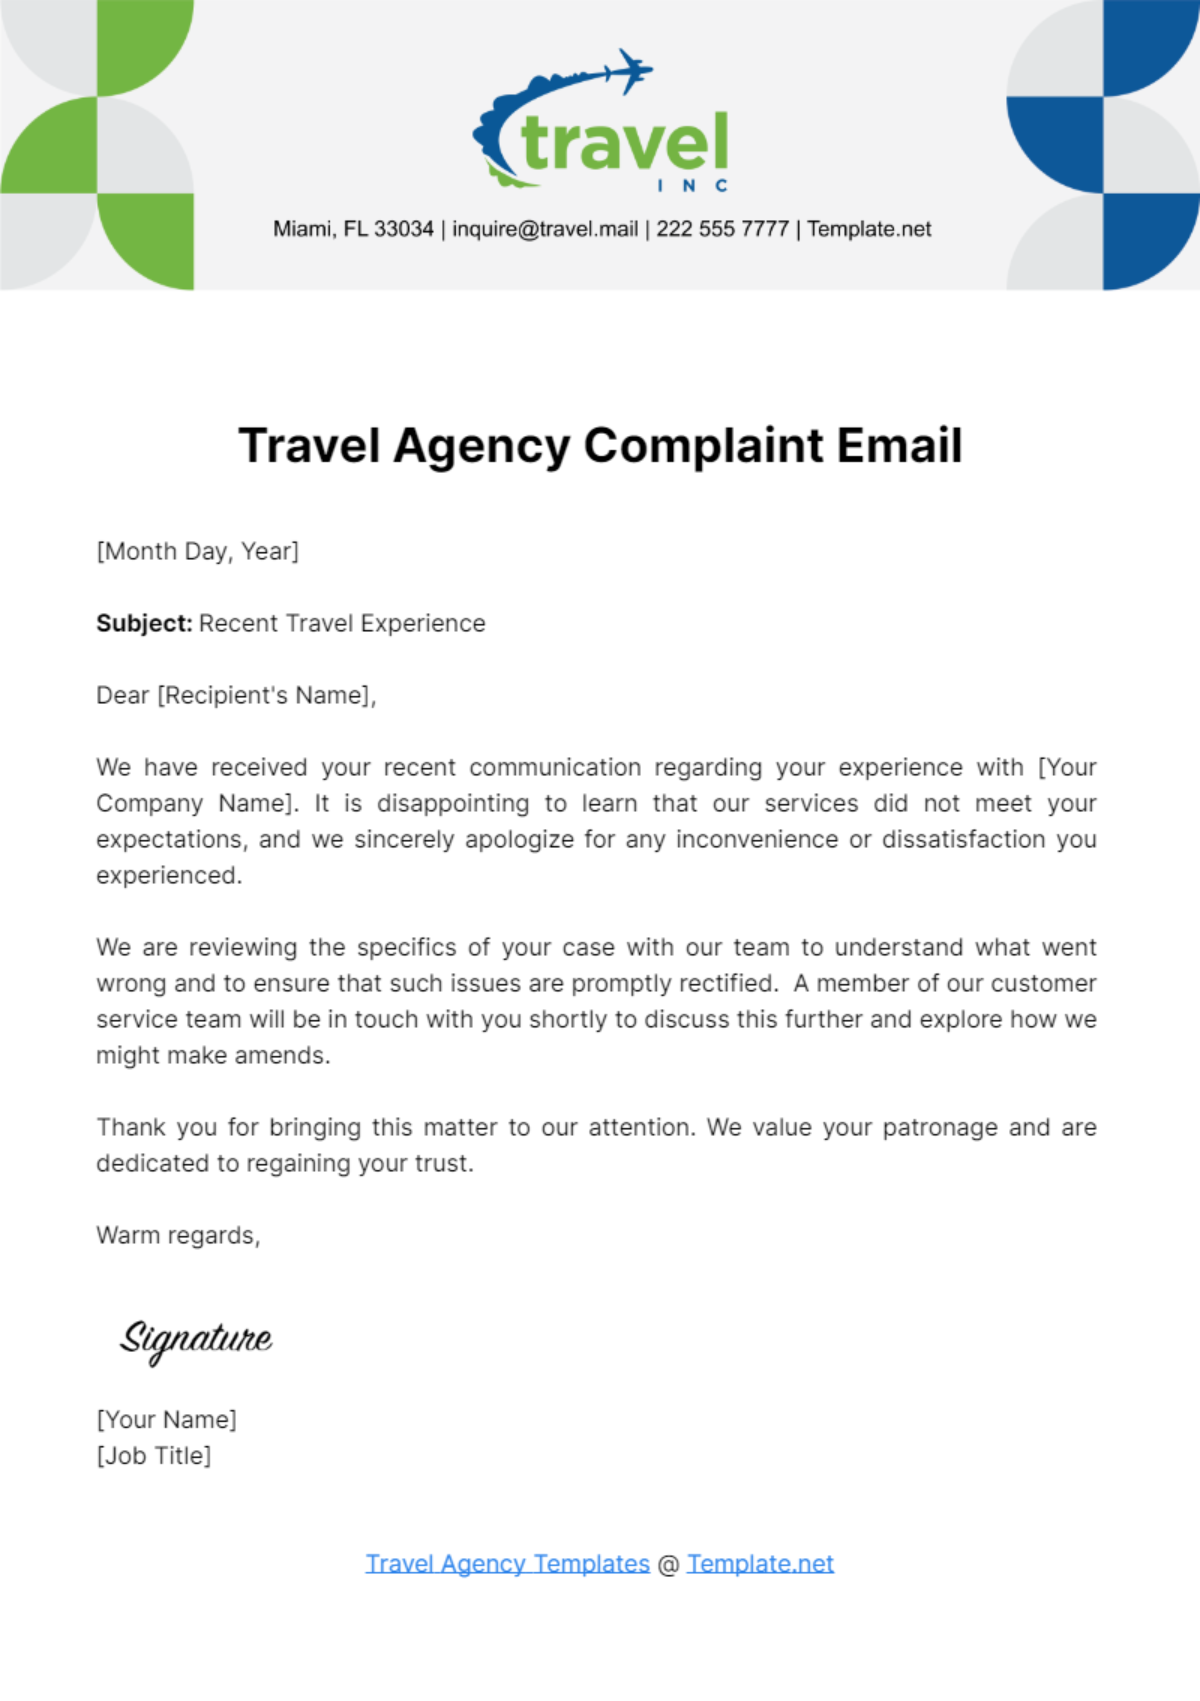 Travel Agency Complaint Email Template